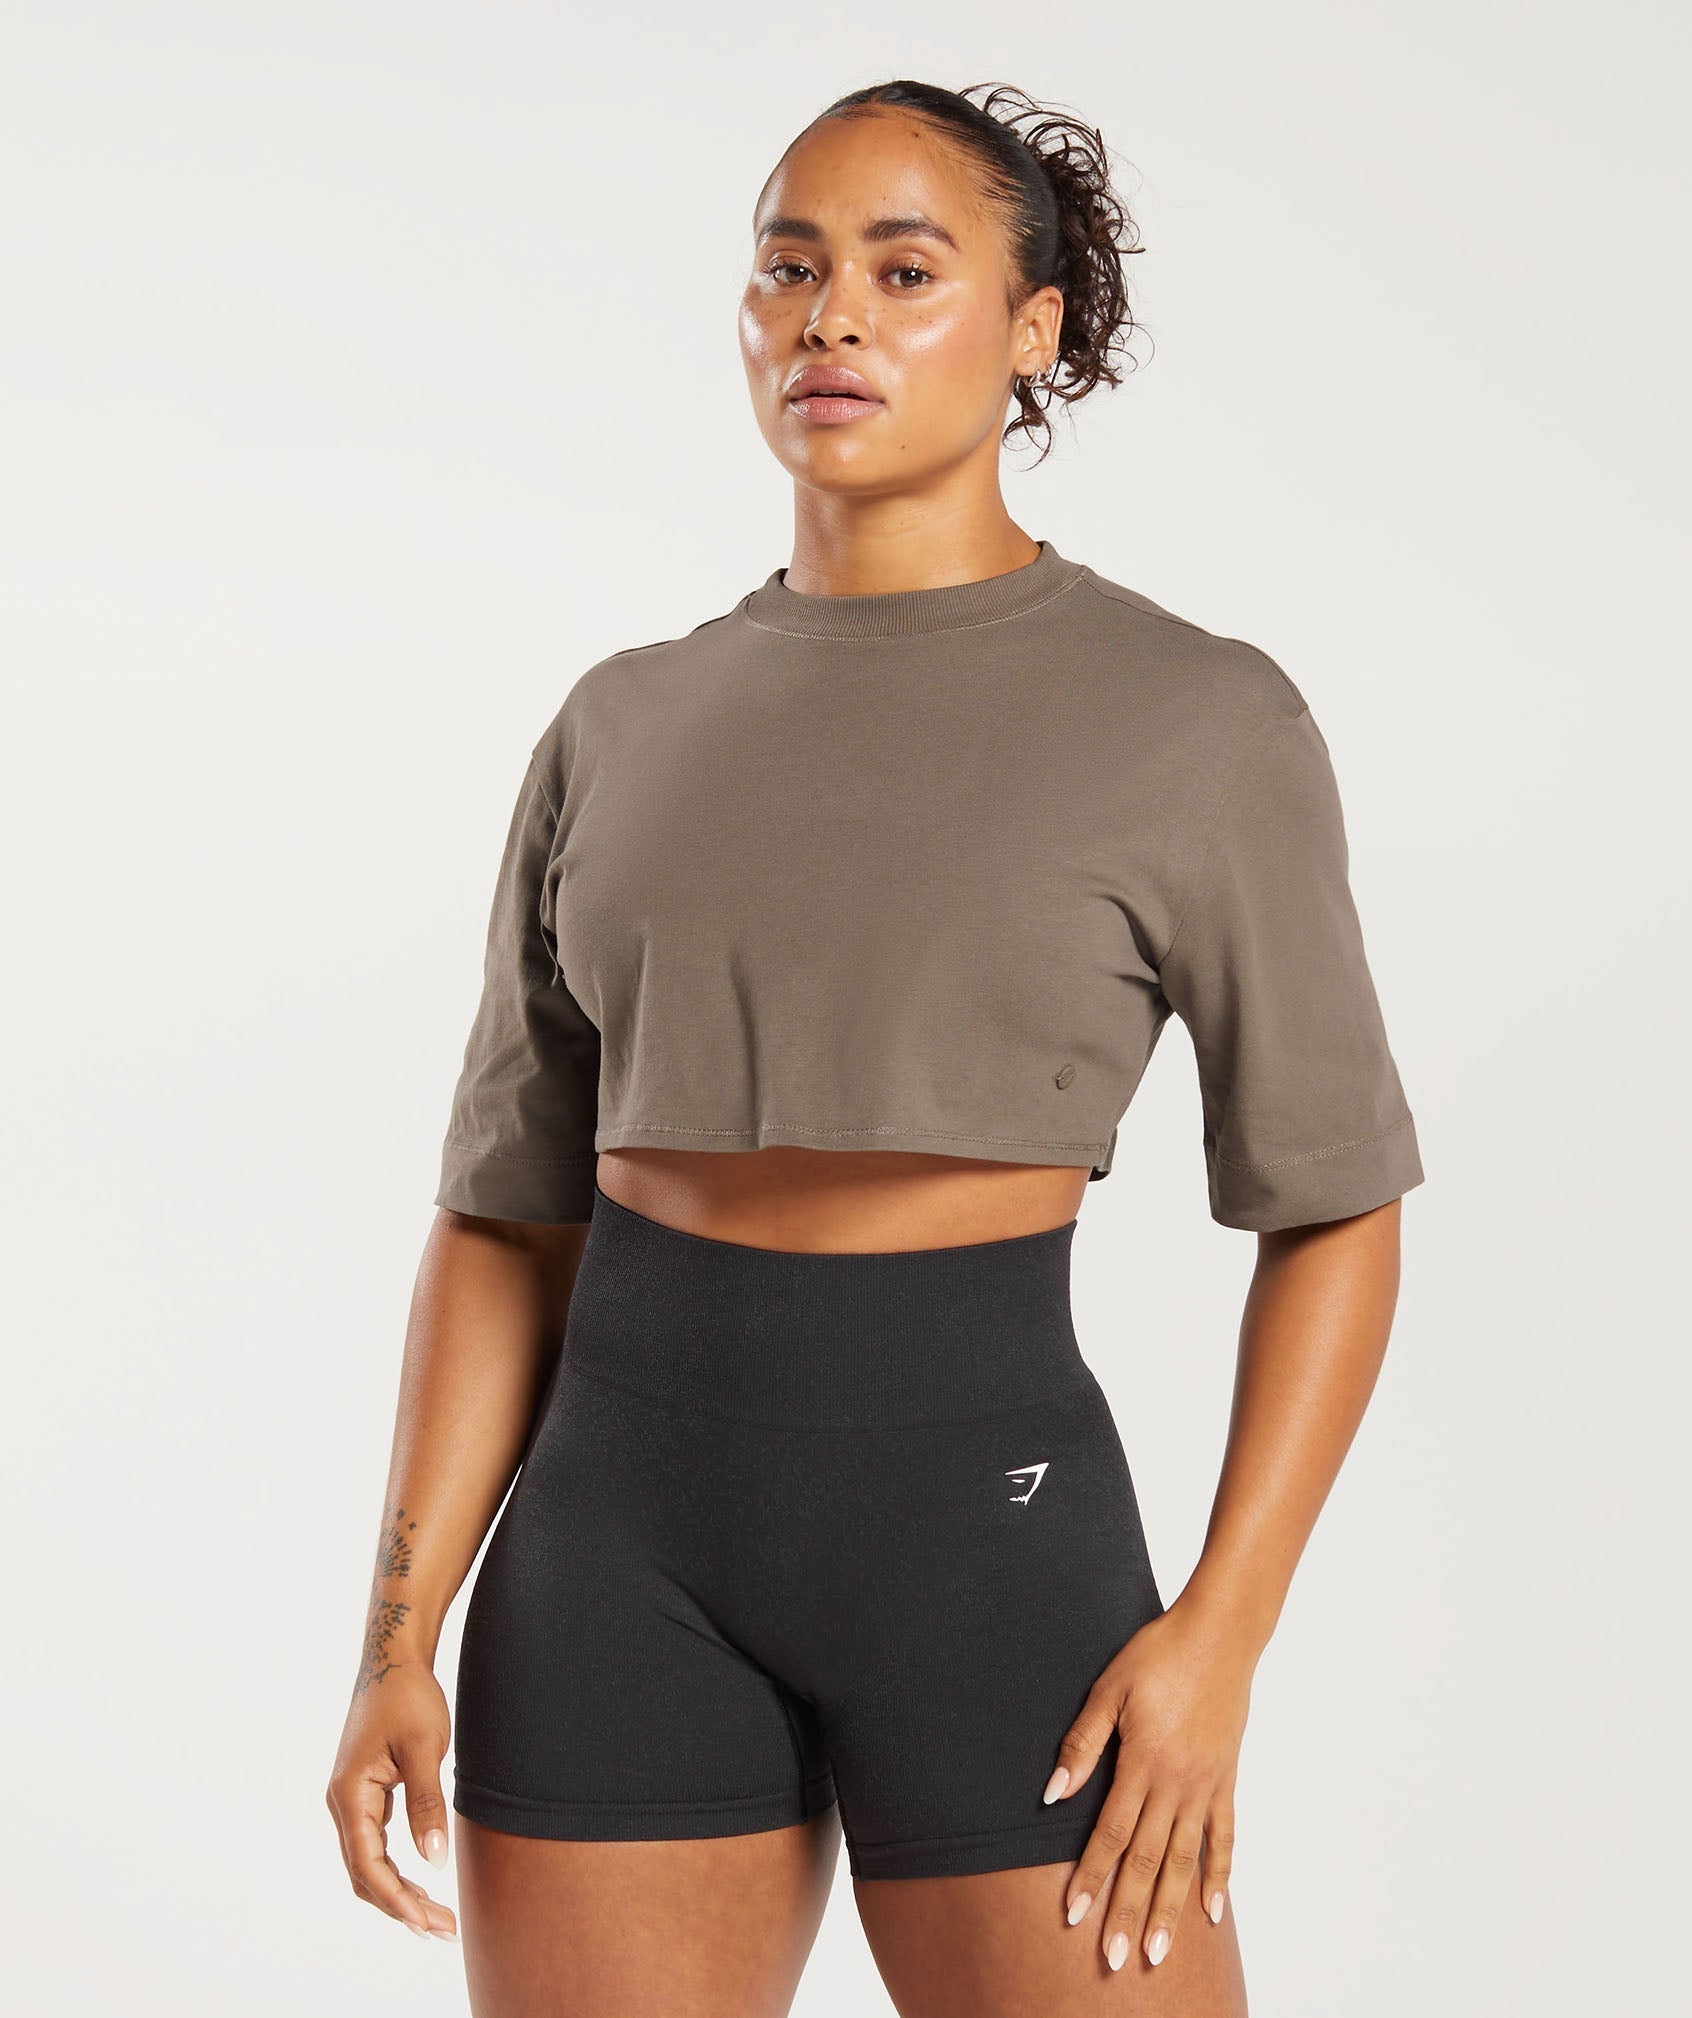 Cotton Boxy Crop Top in Camo Brown - view 1